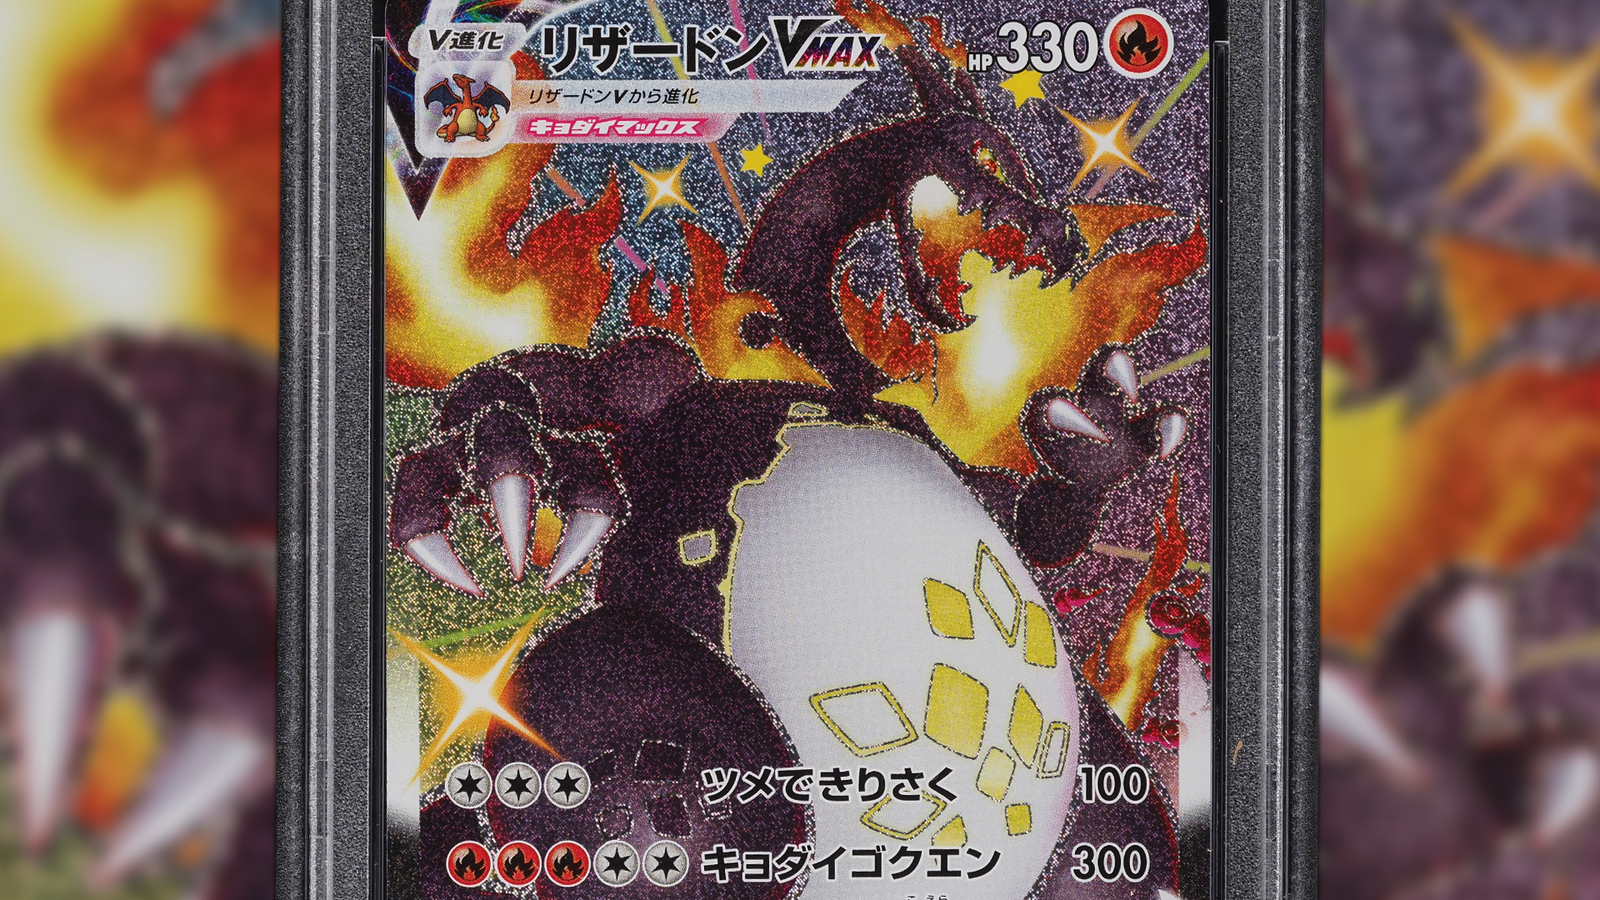 I love the Amazing Rayquaza card, the the silver borders from the